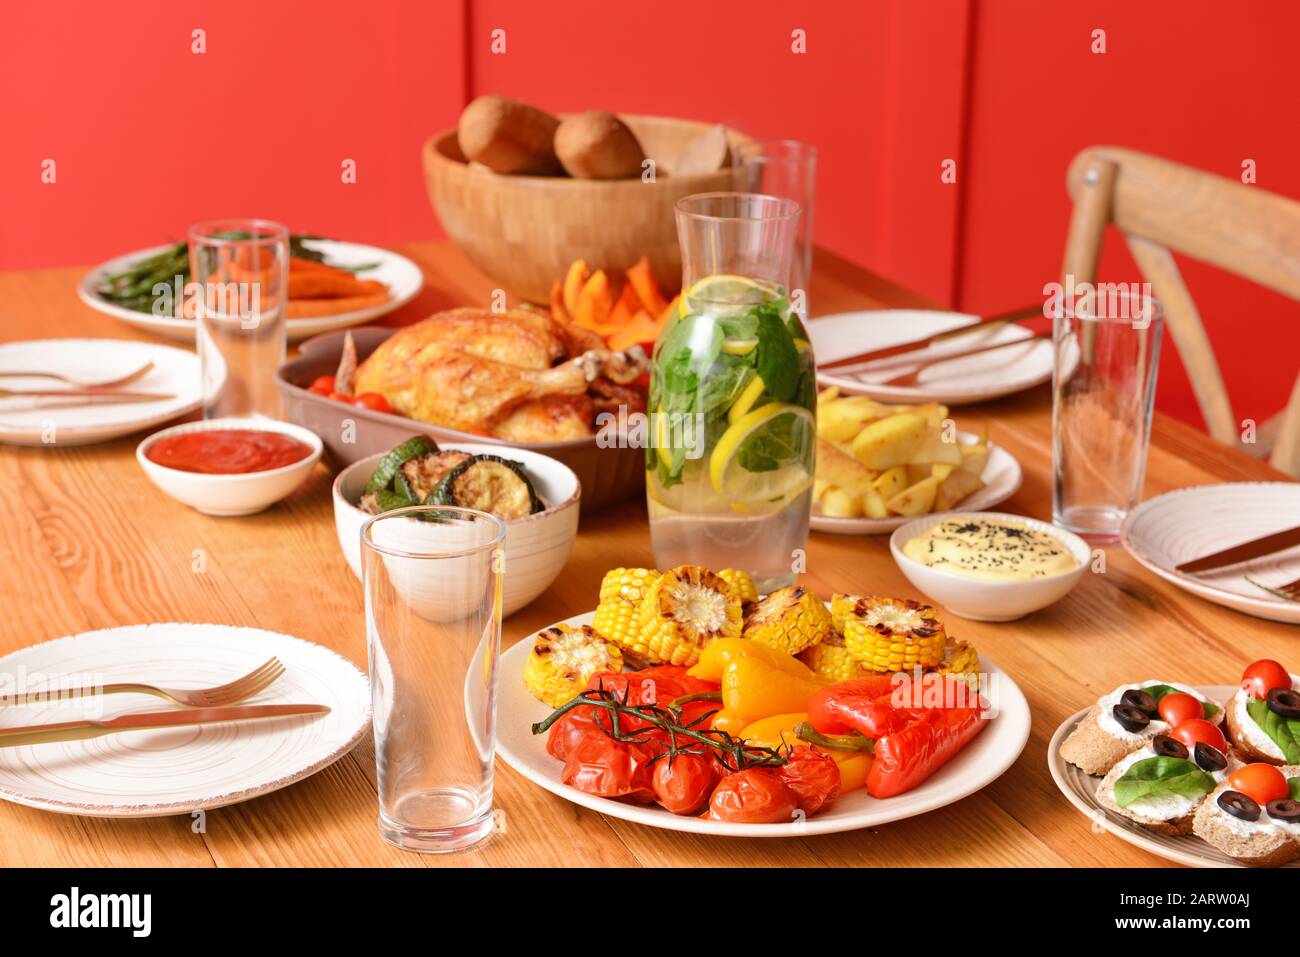 Table set for big family dinner Stock Photo - Alamy